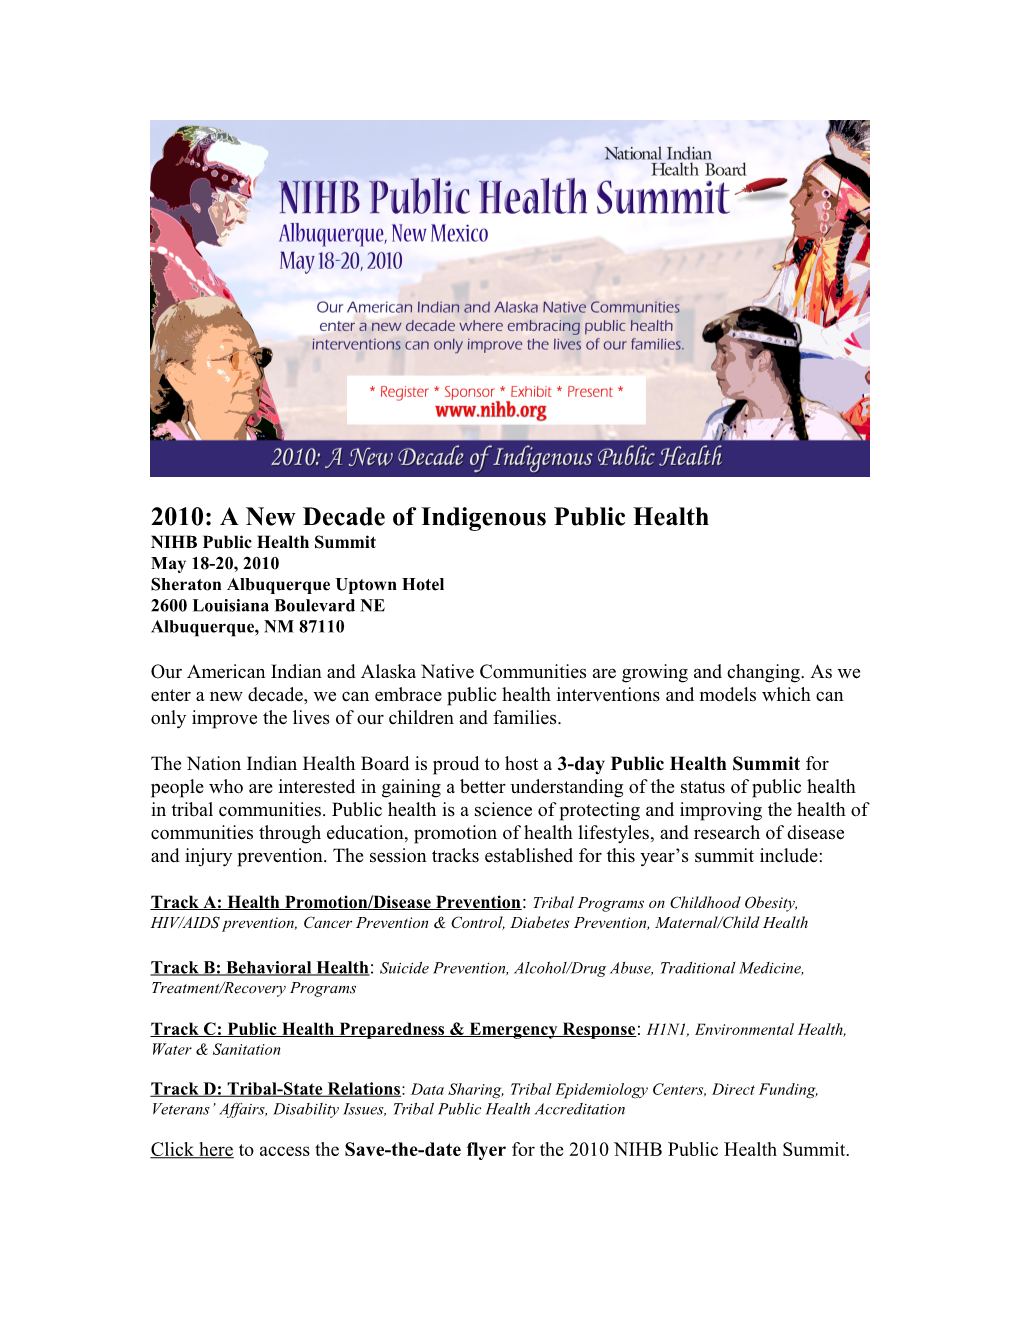 2010: a New Decade of Indigenous Public Health